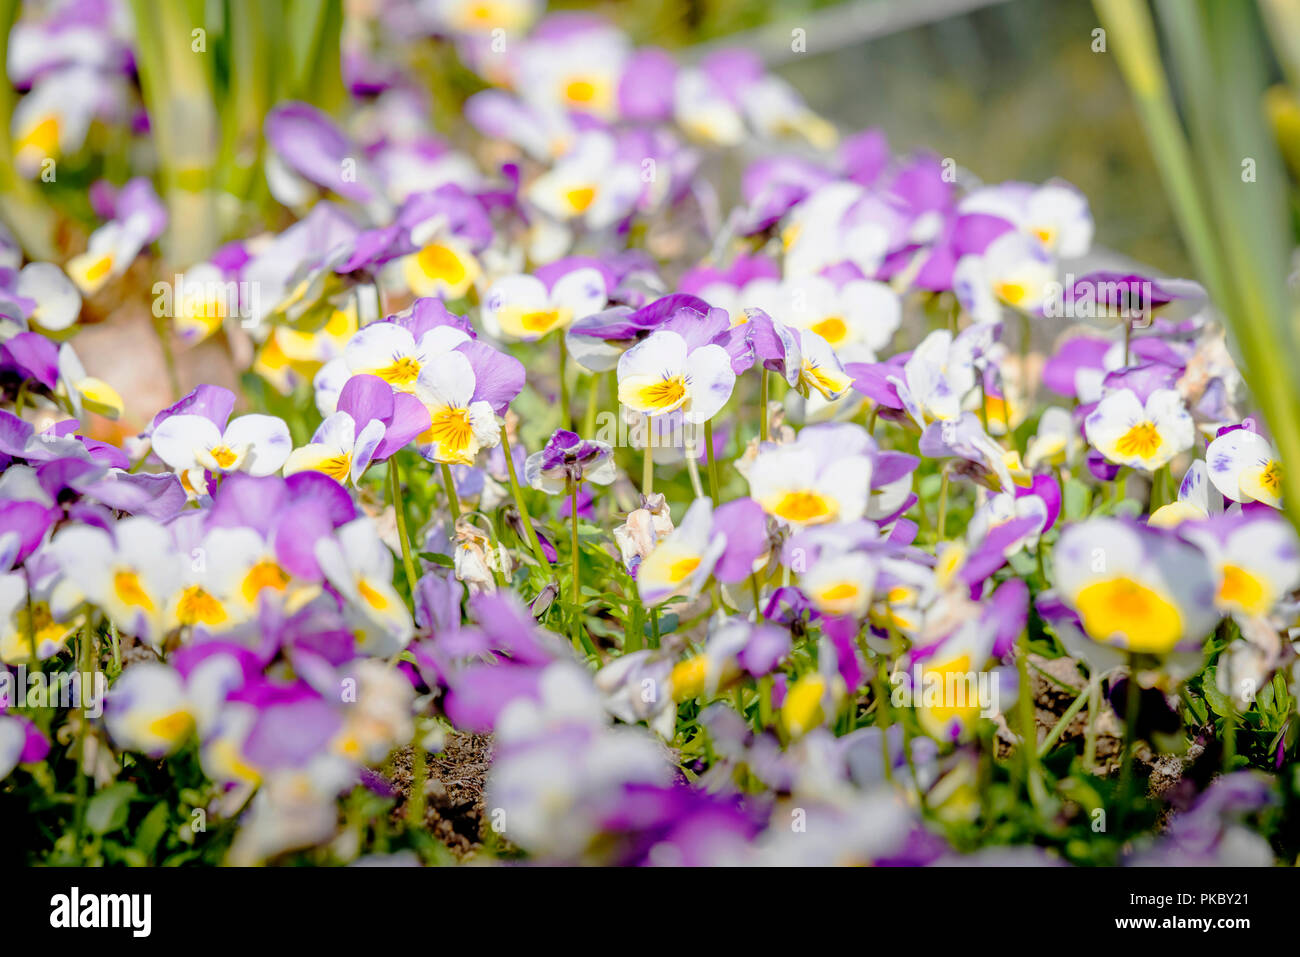 Viola tricolor also known as Johnny Jump up flowers in the sun on a meadow in the summer Stock Photo